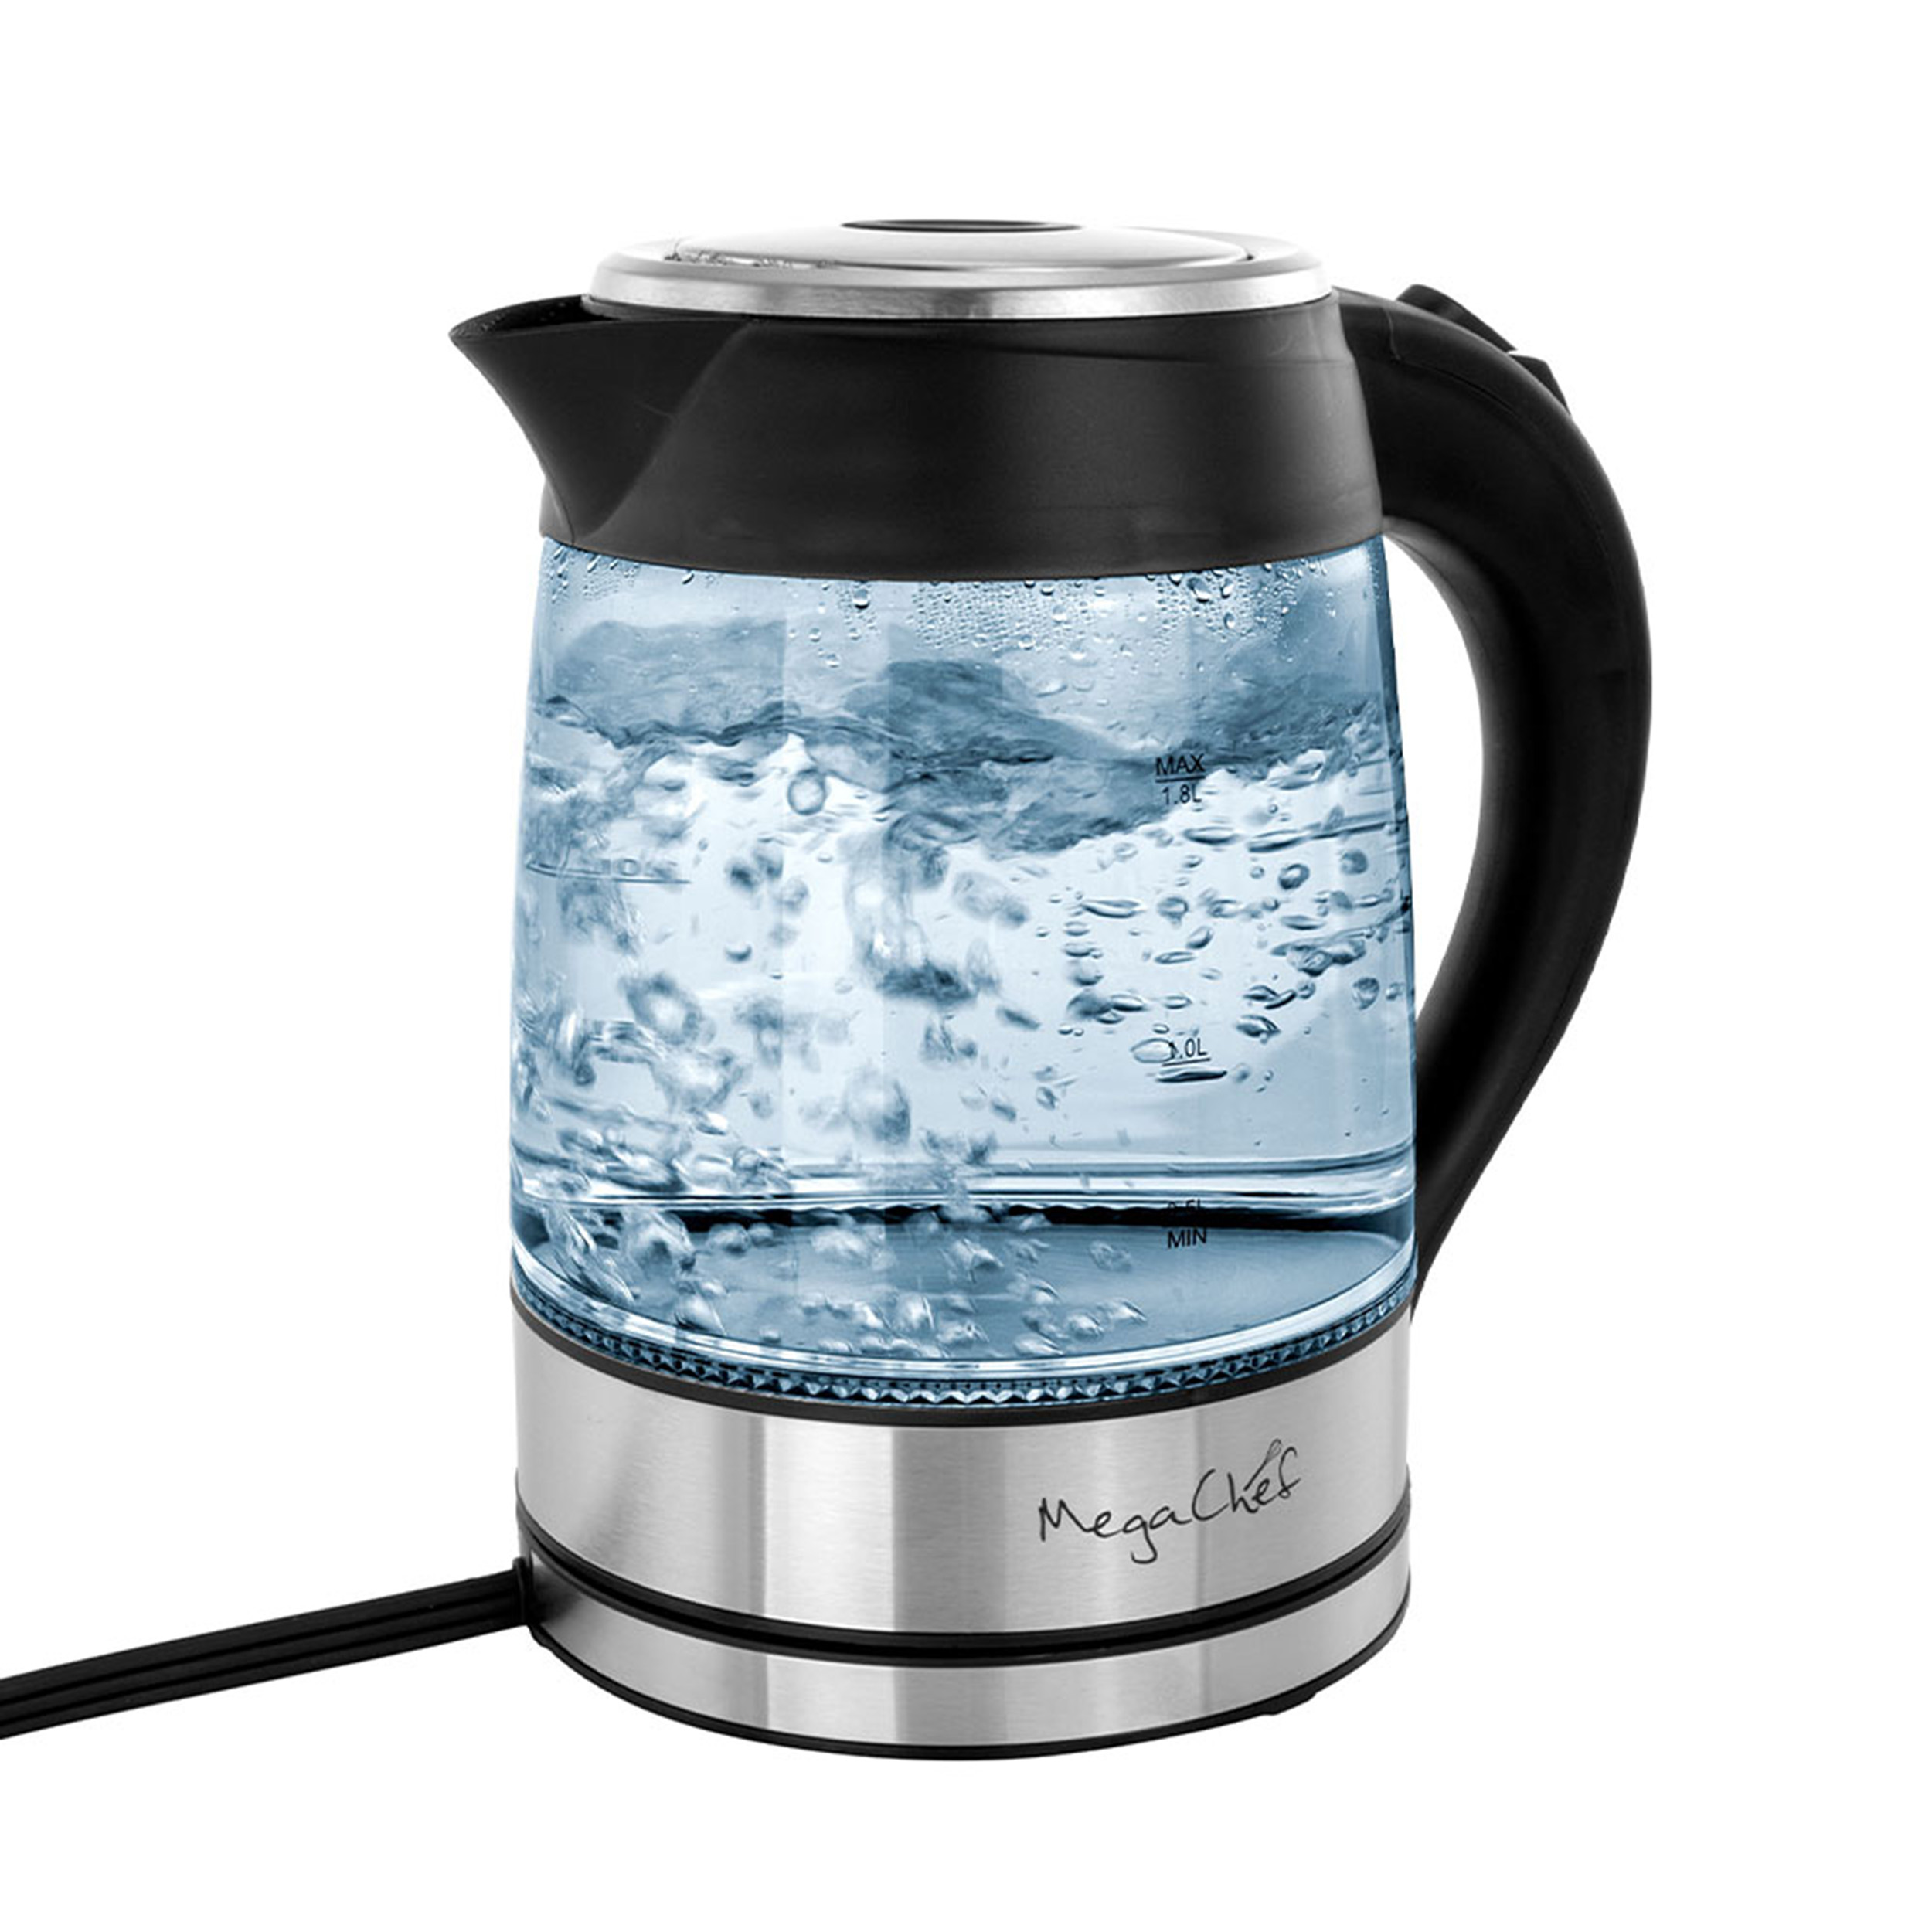 MegaChef 1.8 Liter Glass and Stainless Steel Electric Tea Kettle - image 1 of 11